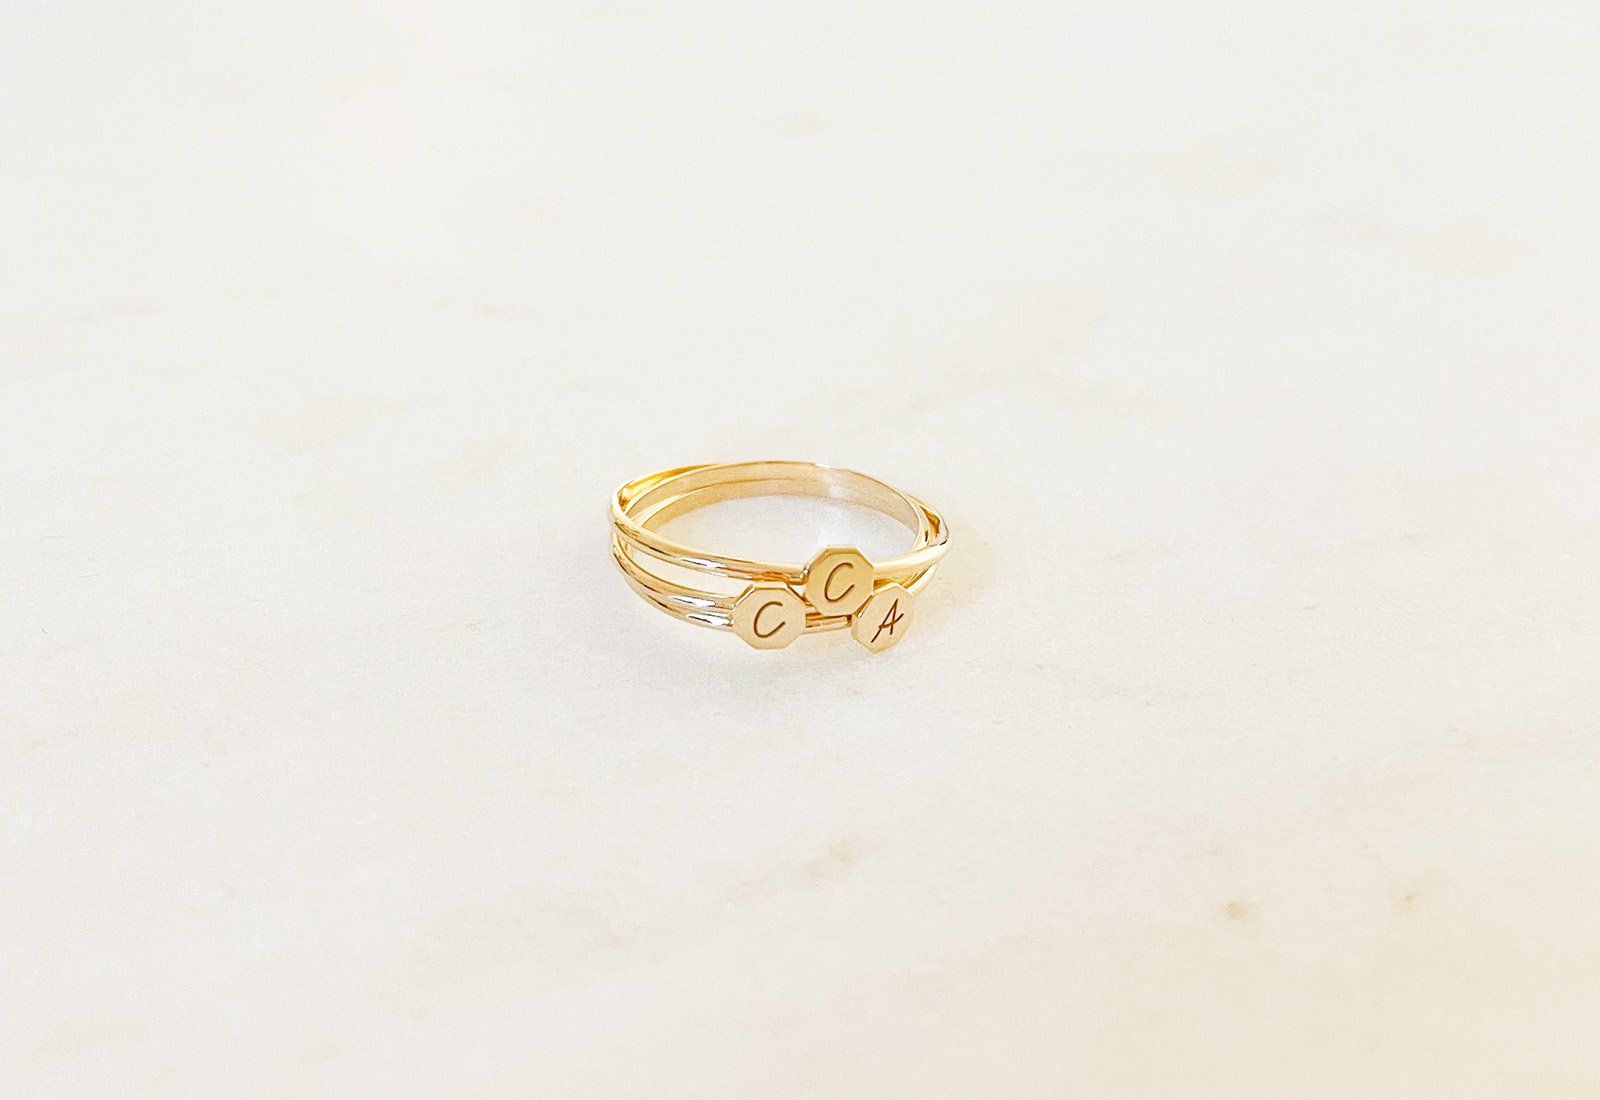 Initiale personalized rings in 18K yellow gold